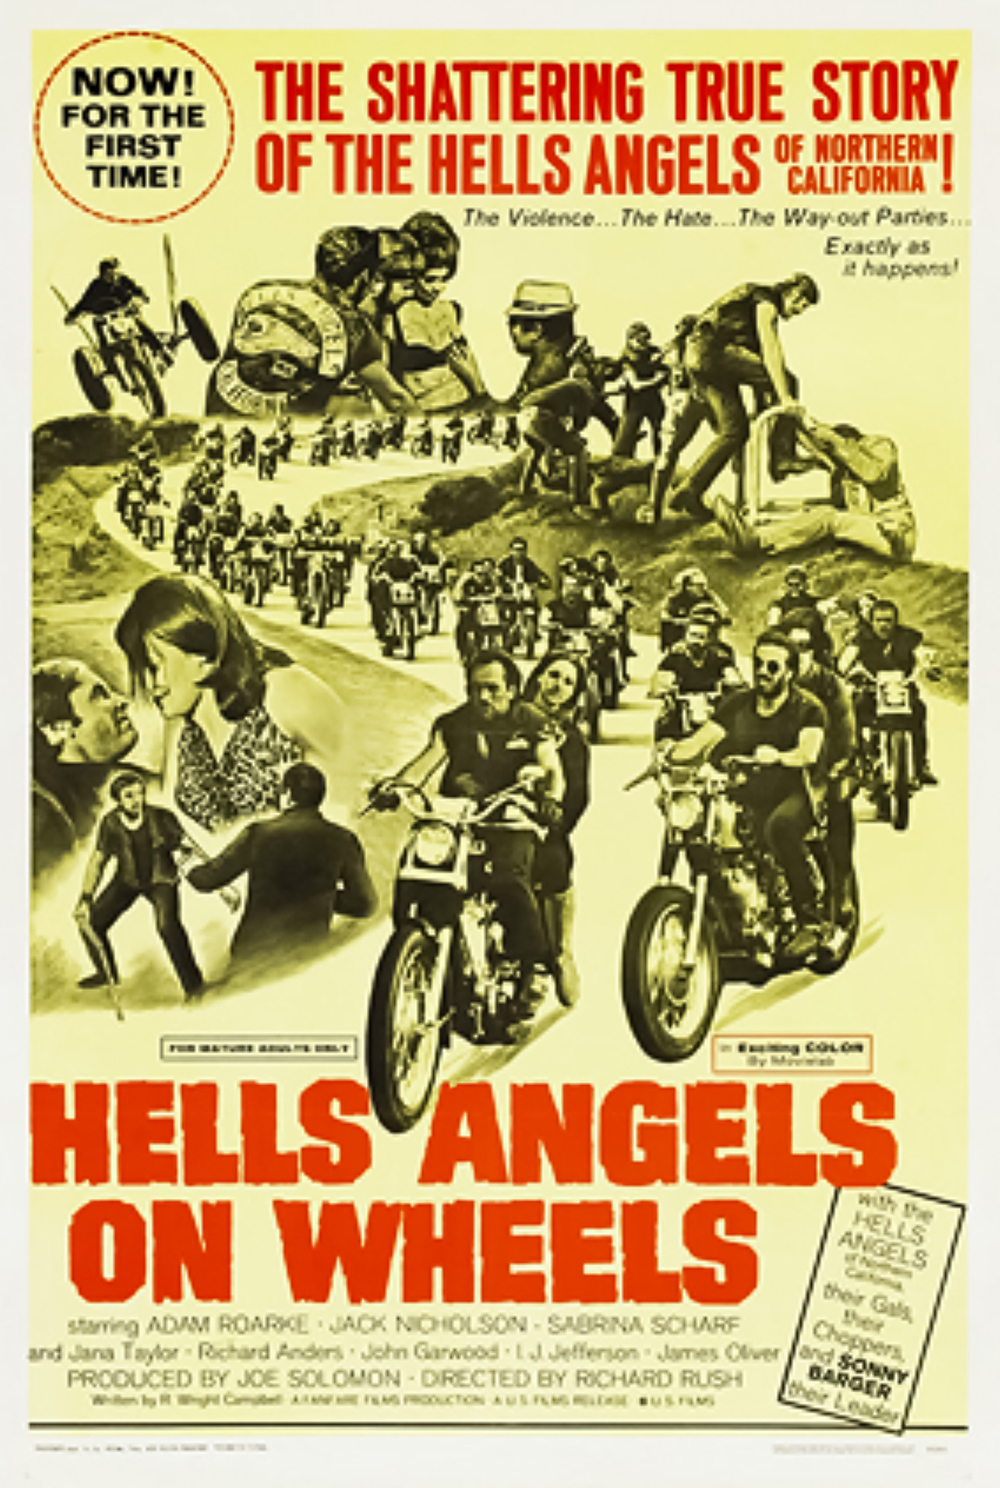 Hell's Angels on Wheels